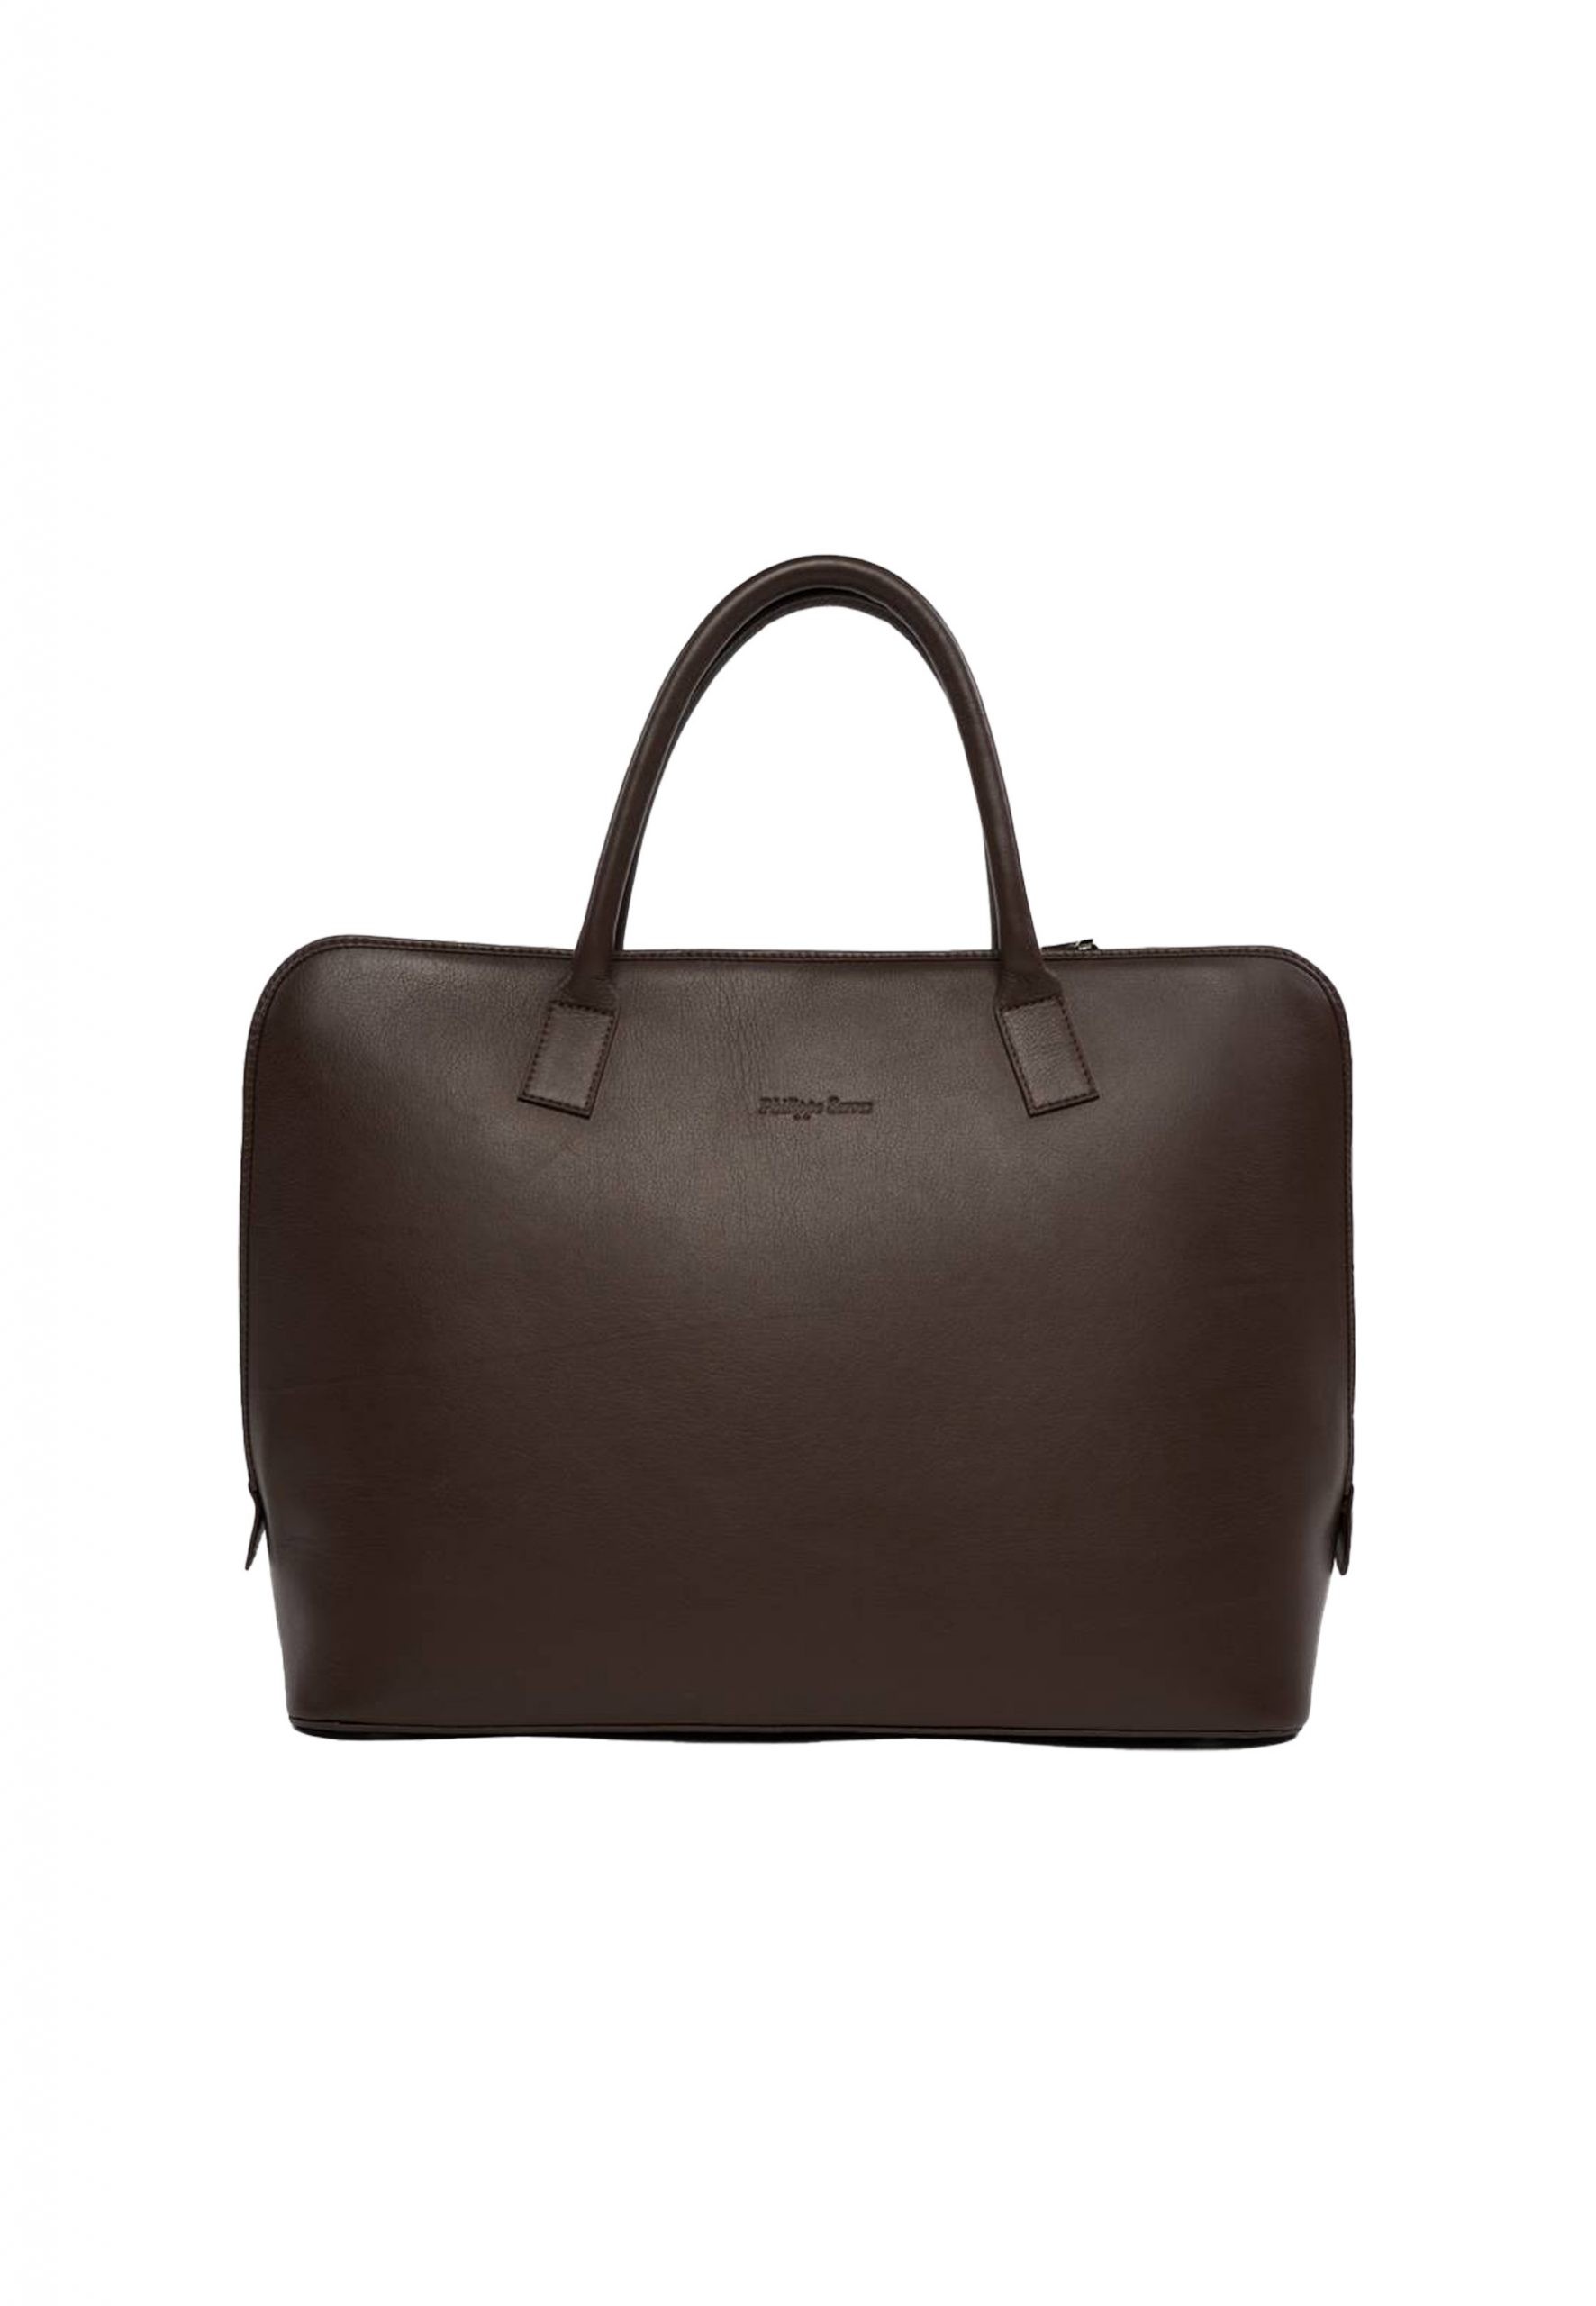 Sac business porte document Philippe Serres 100% Made in France